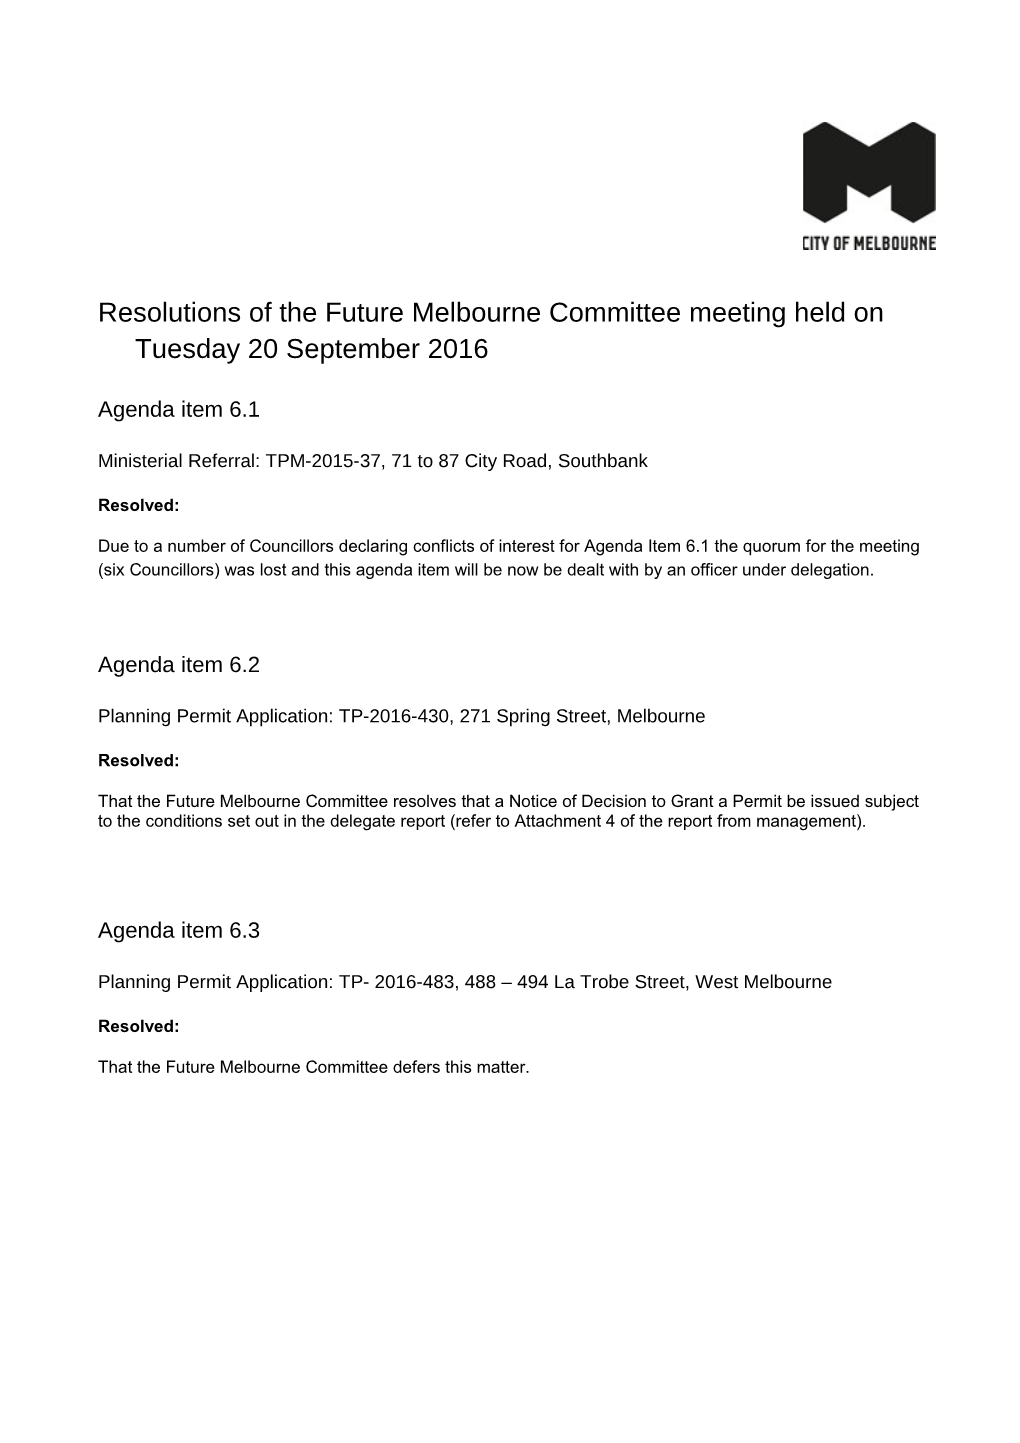 Resolutions of the Future Melbourne Committee Meeting Held on Tuesday 20 September 2016